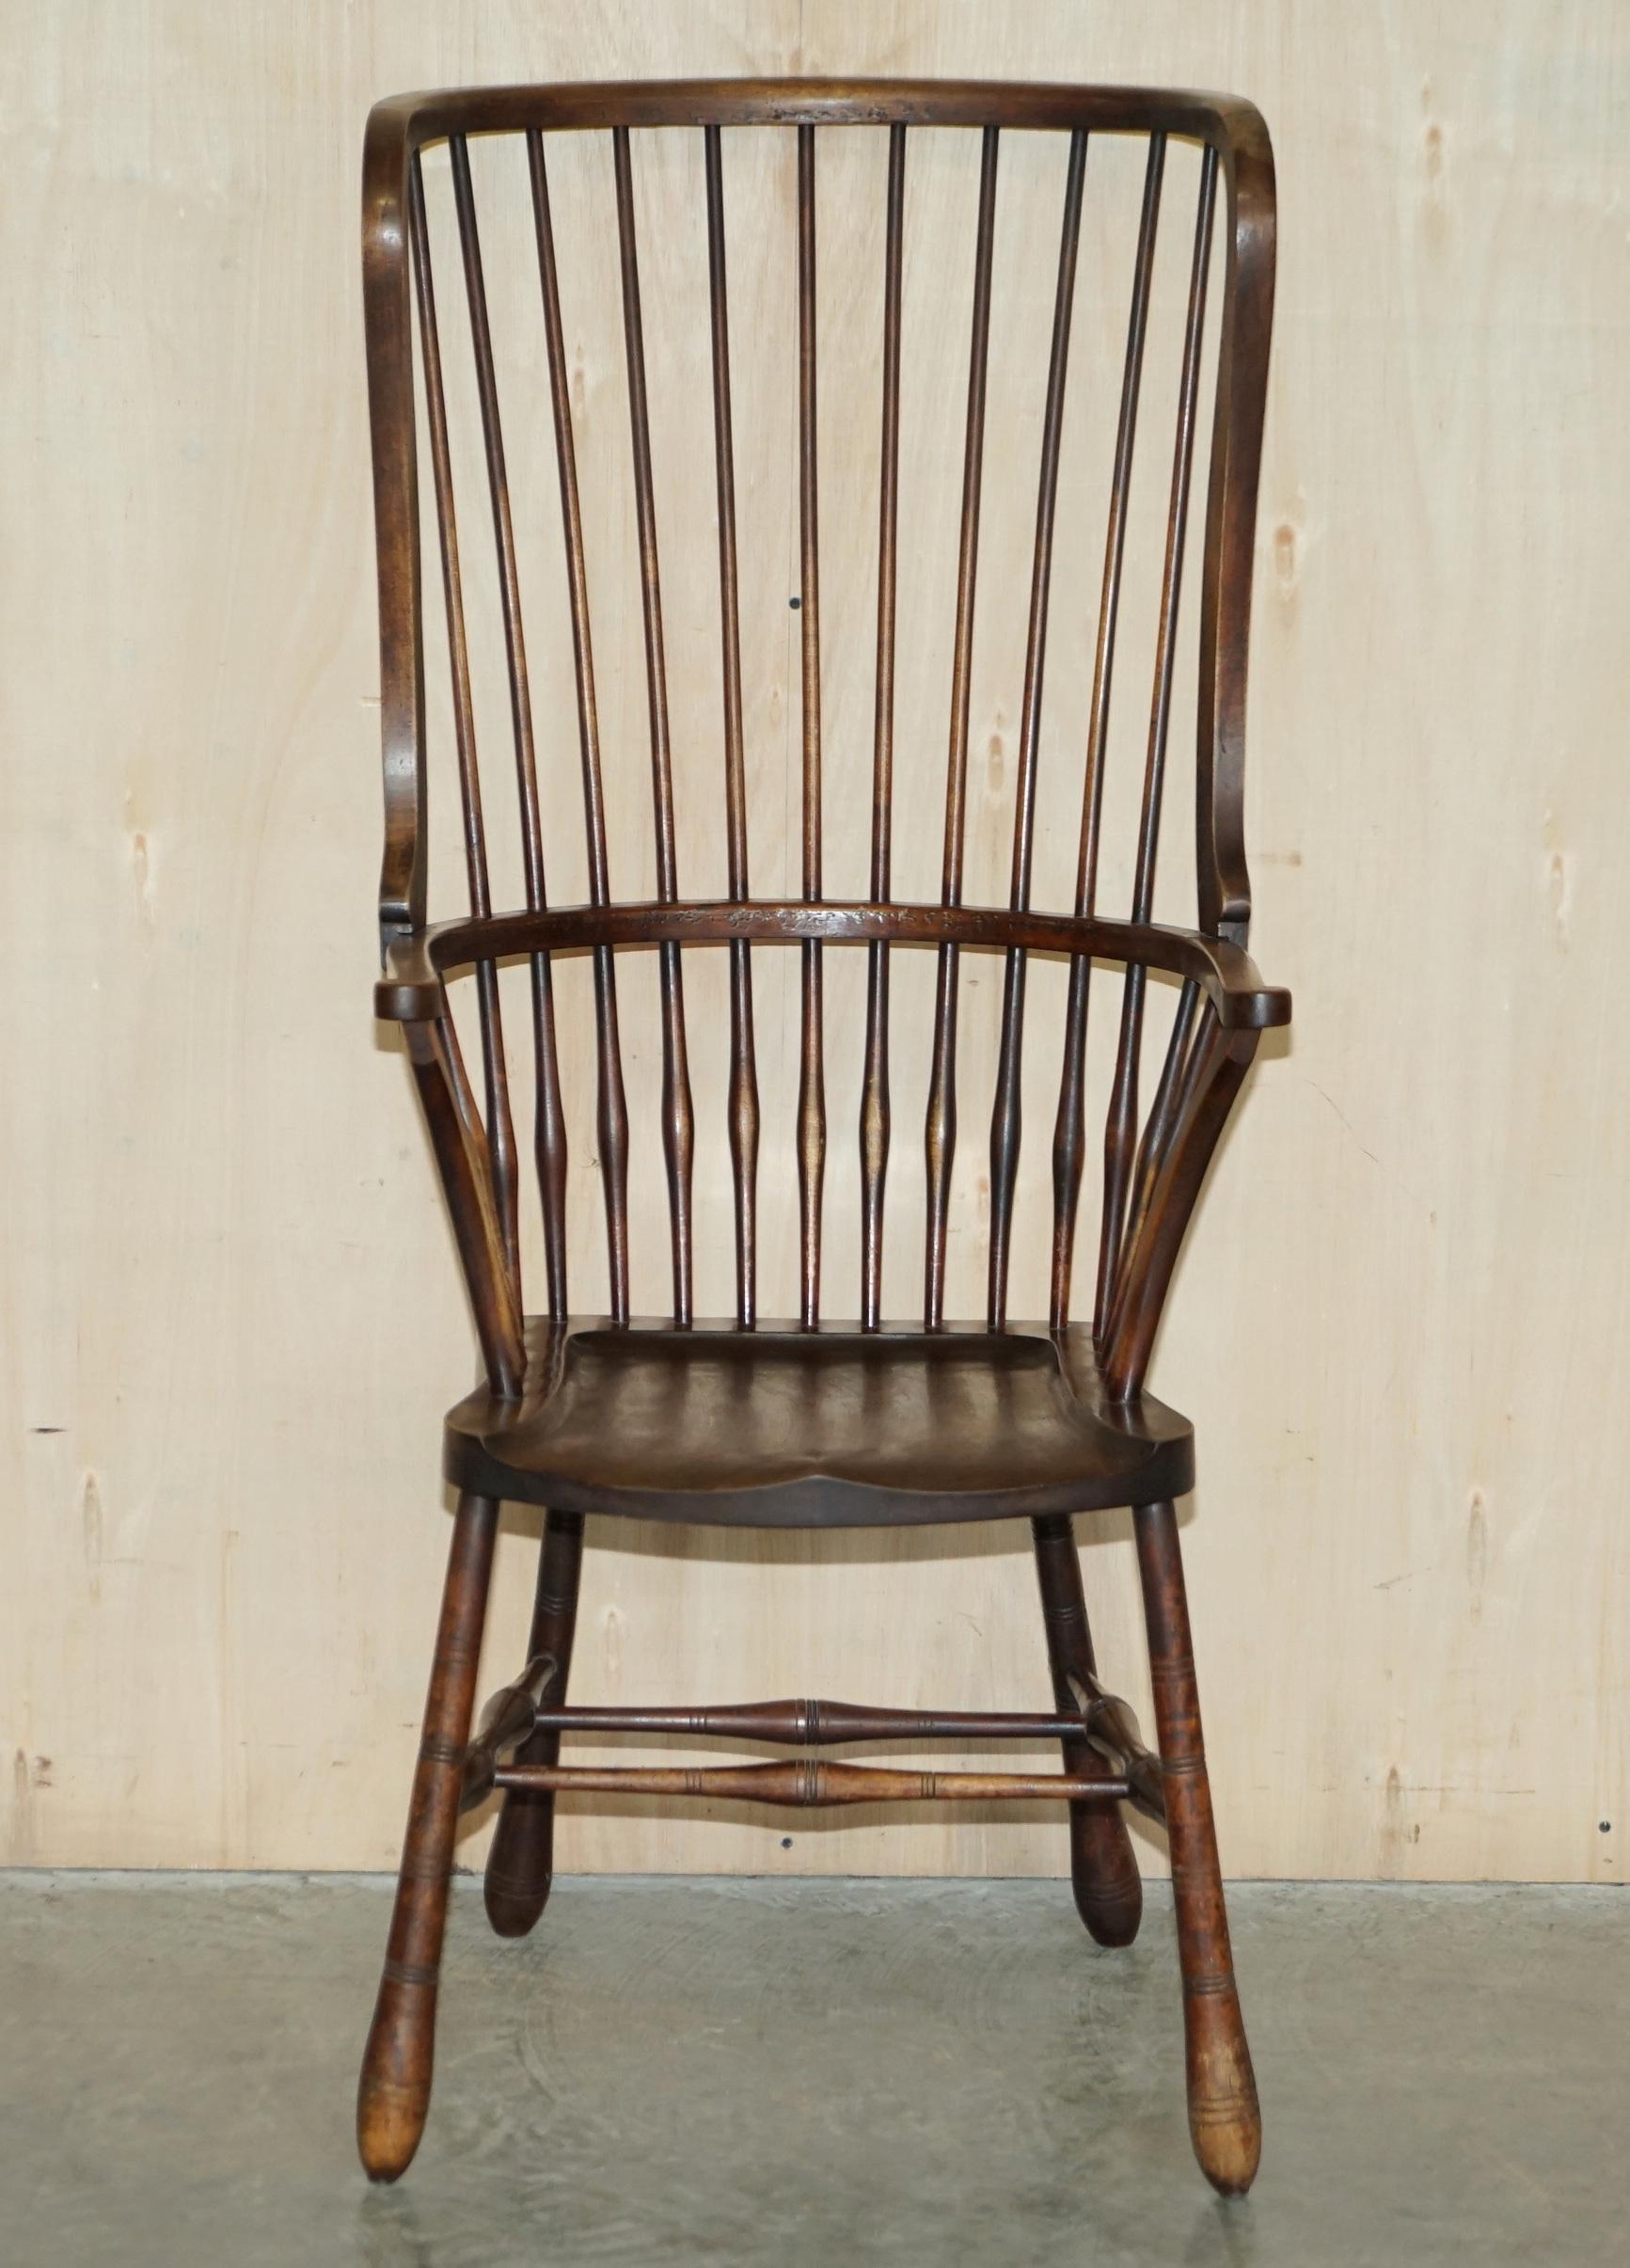 We are delighted to offer for sale this stunning early 19th century English extra large, Wingback Windsor armchair in ash.

I have seen thousands on Windsor armchairs in my time, this is the only one that has been shaped like a porters wingback